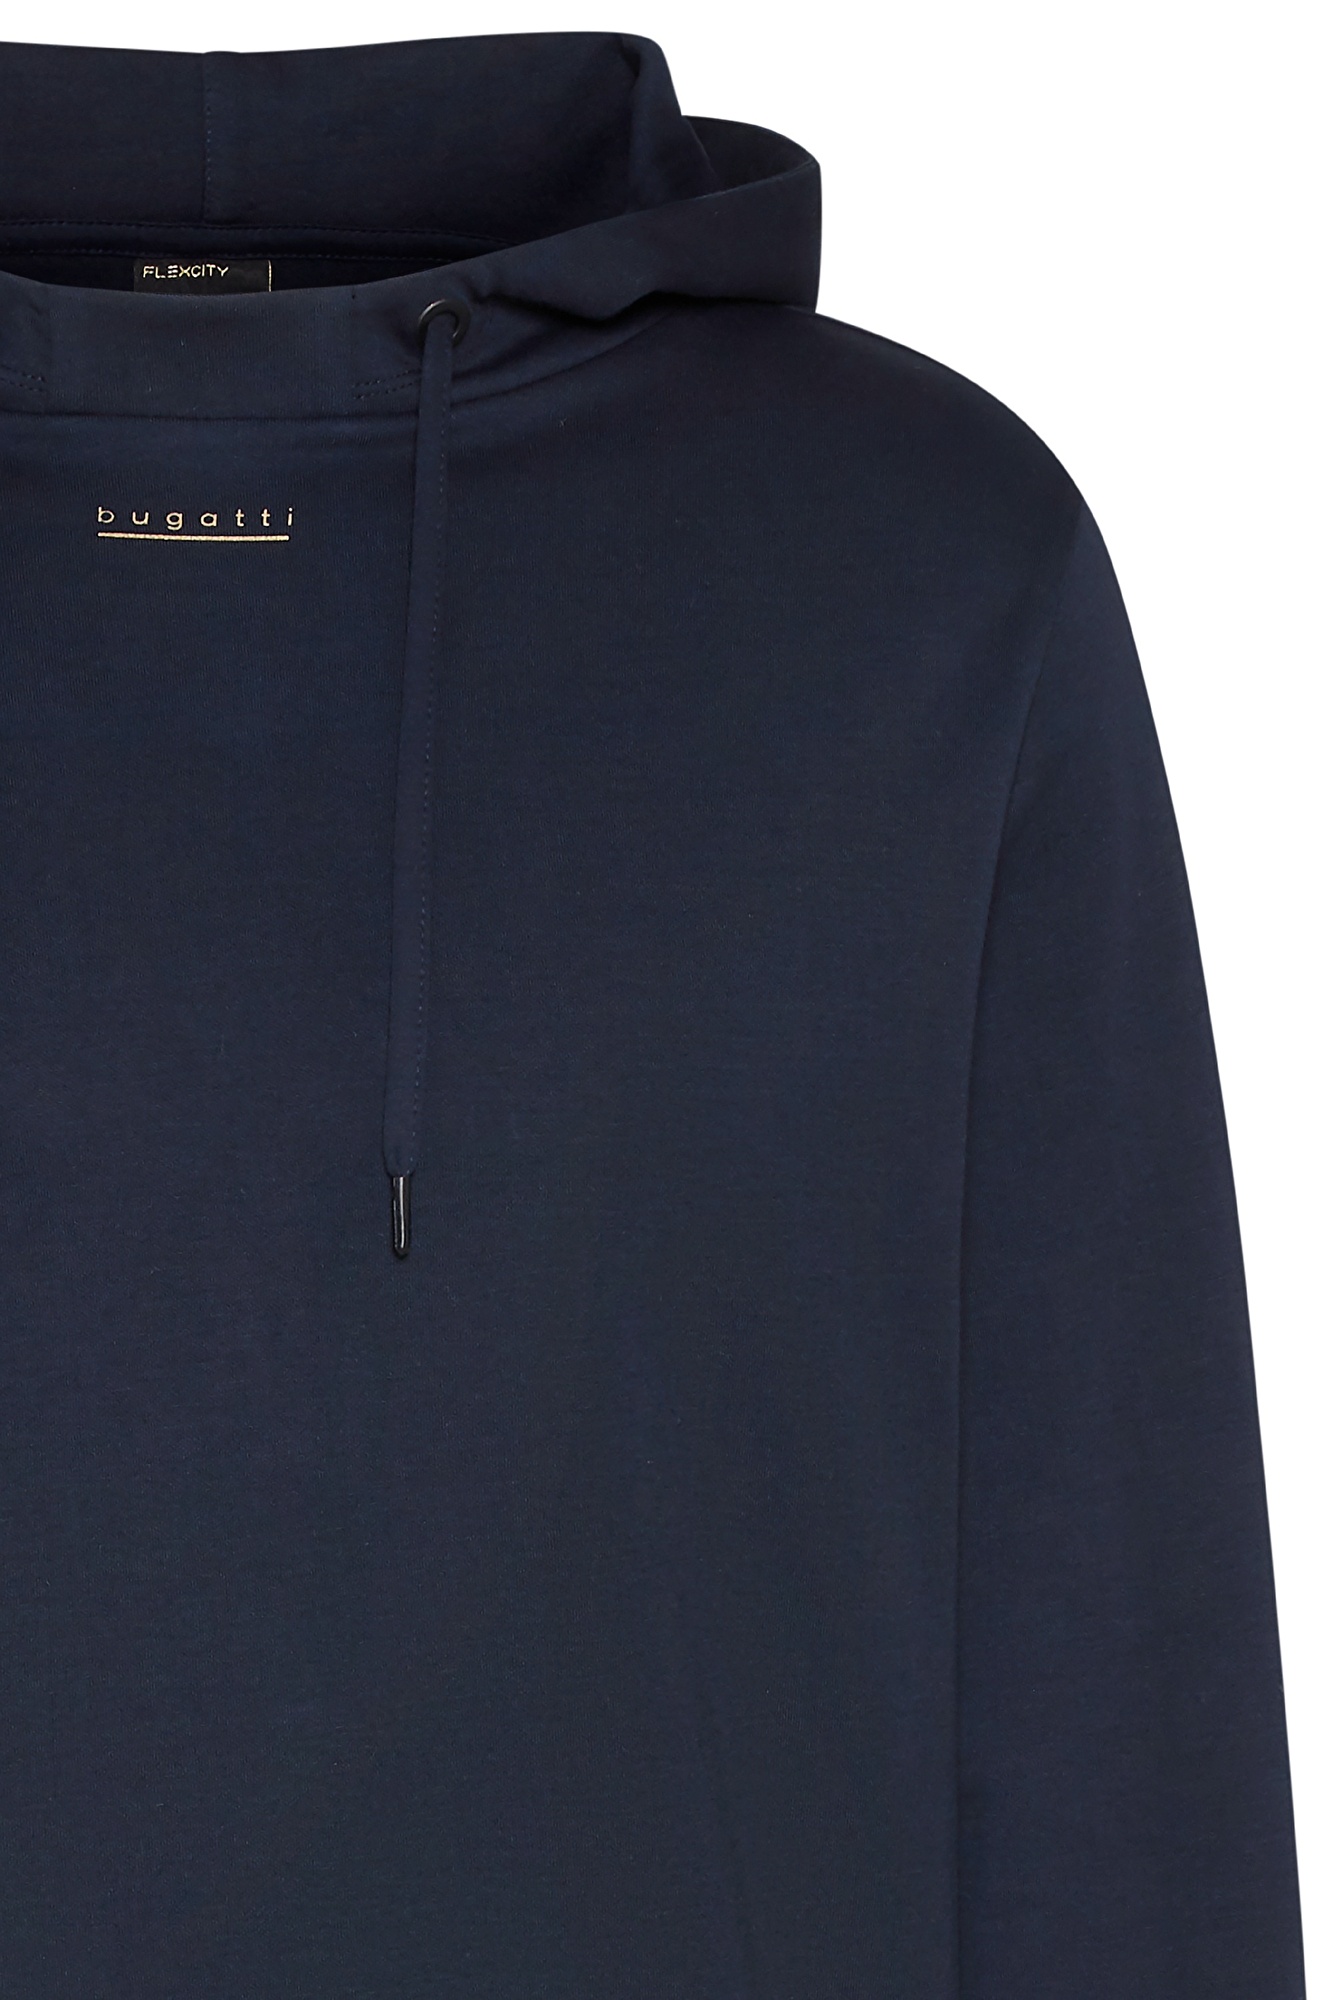 print in | navy logo Hooded With small bugatti in sweatshirt gold